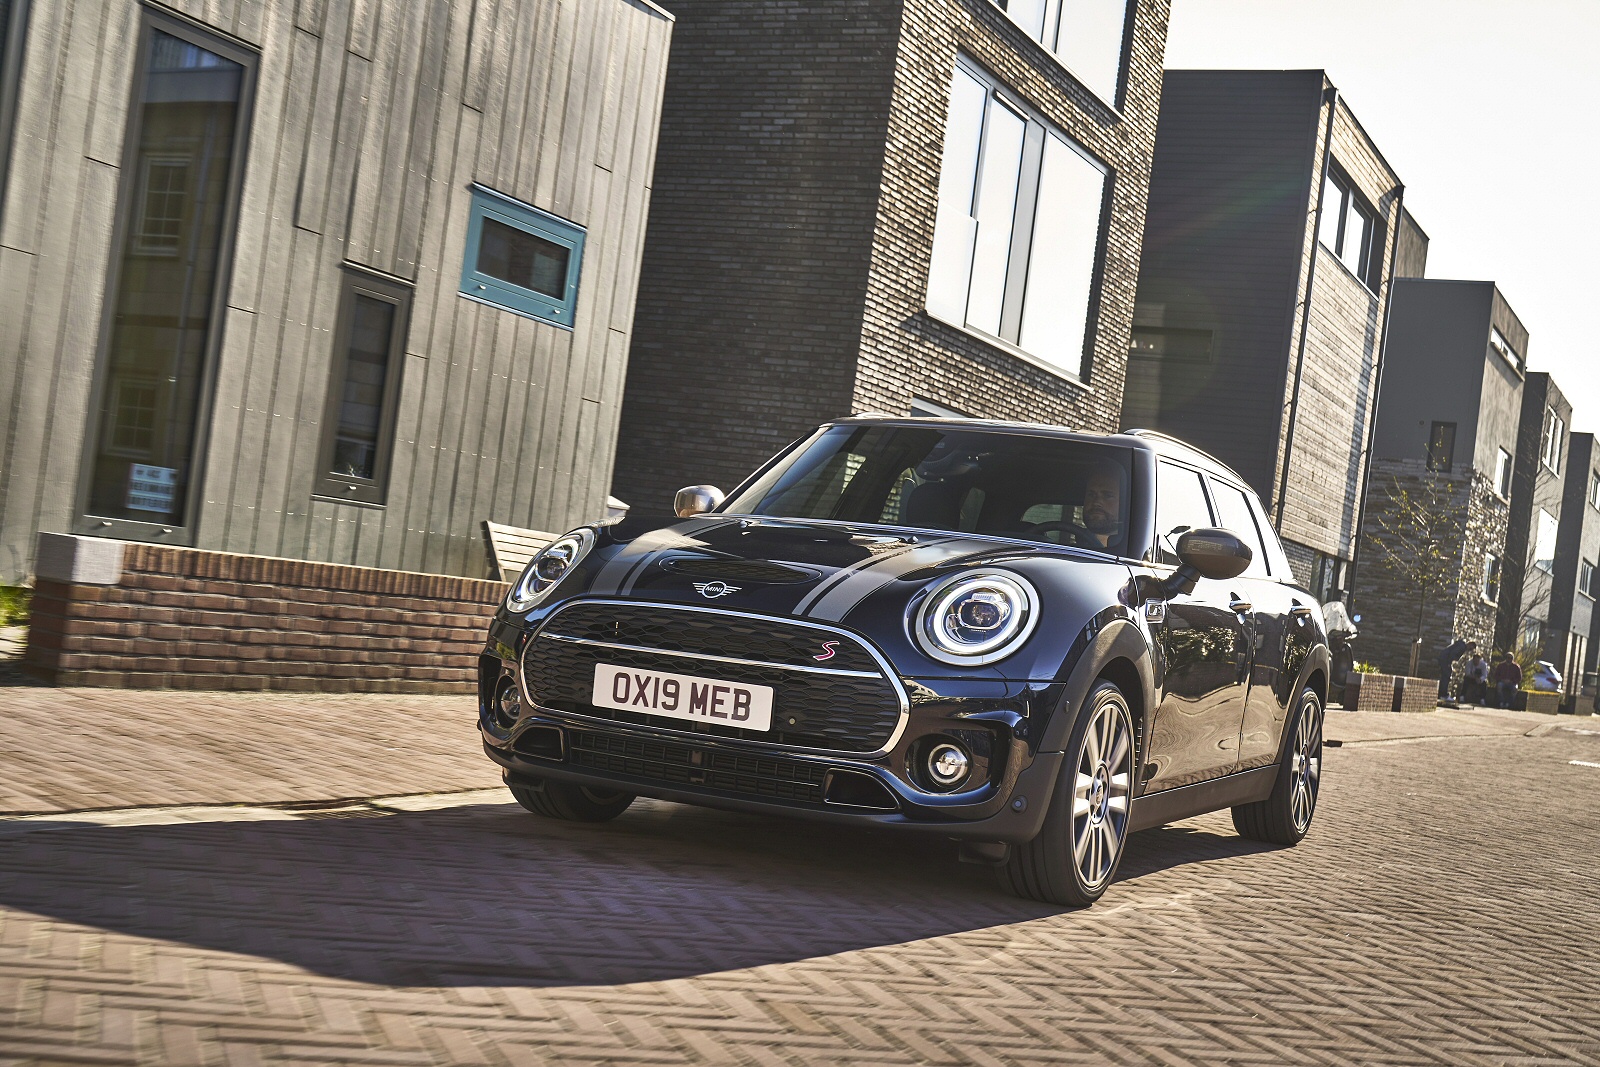 MINI CLUBMAN ESTATE SPECIAL EDITIONS 2.0 Cooper S Shadow Edition 6dr [Comfort Pack]